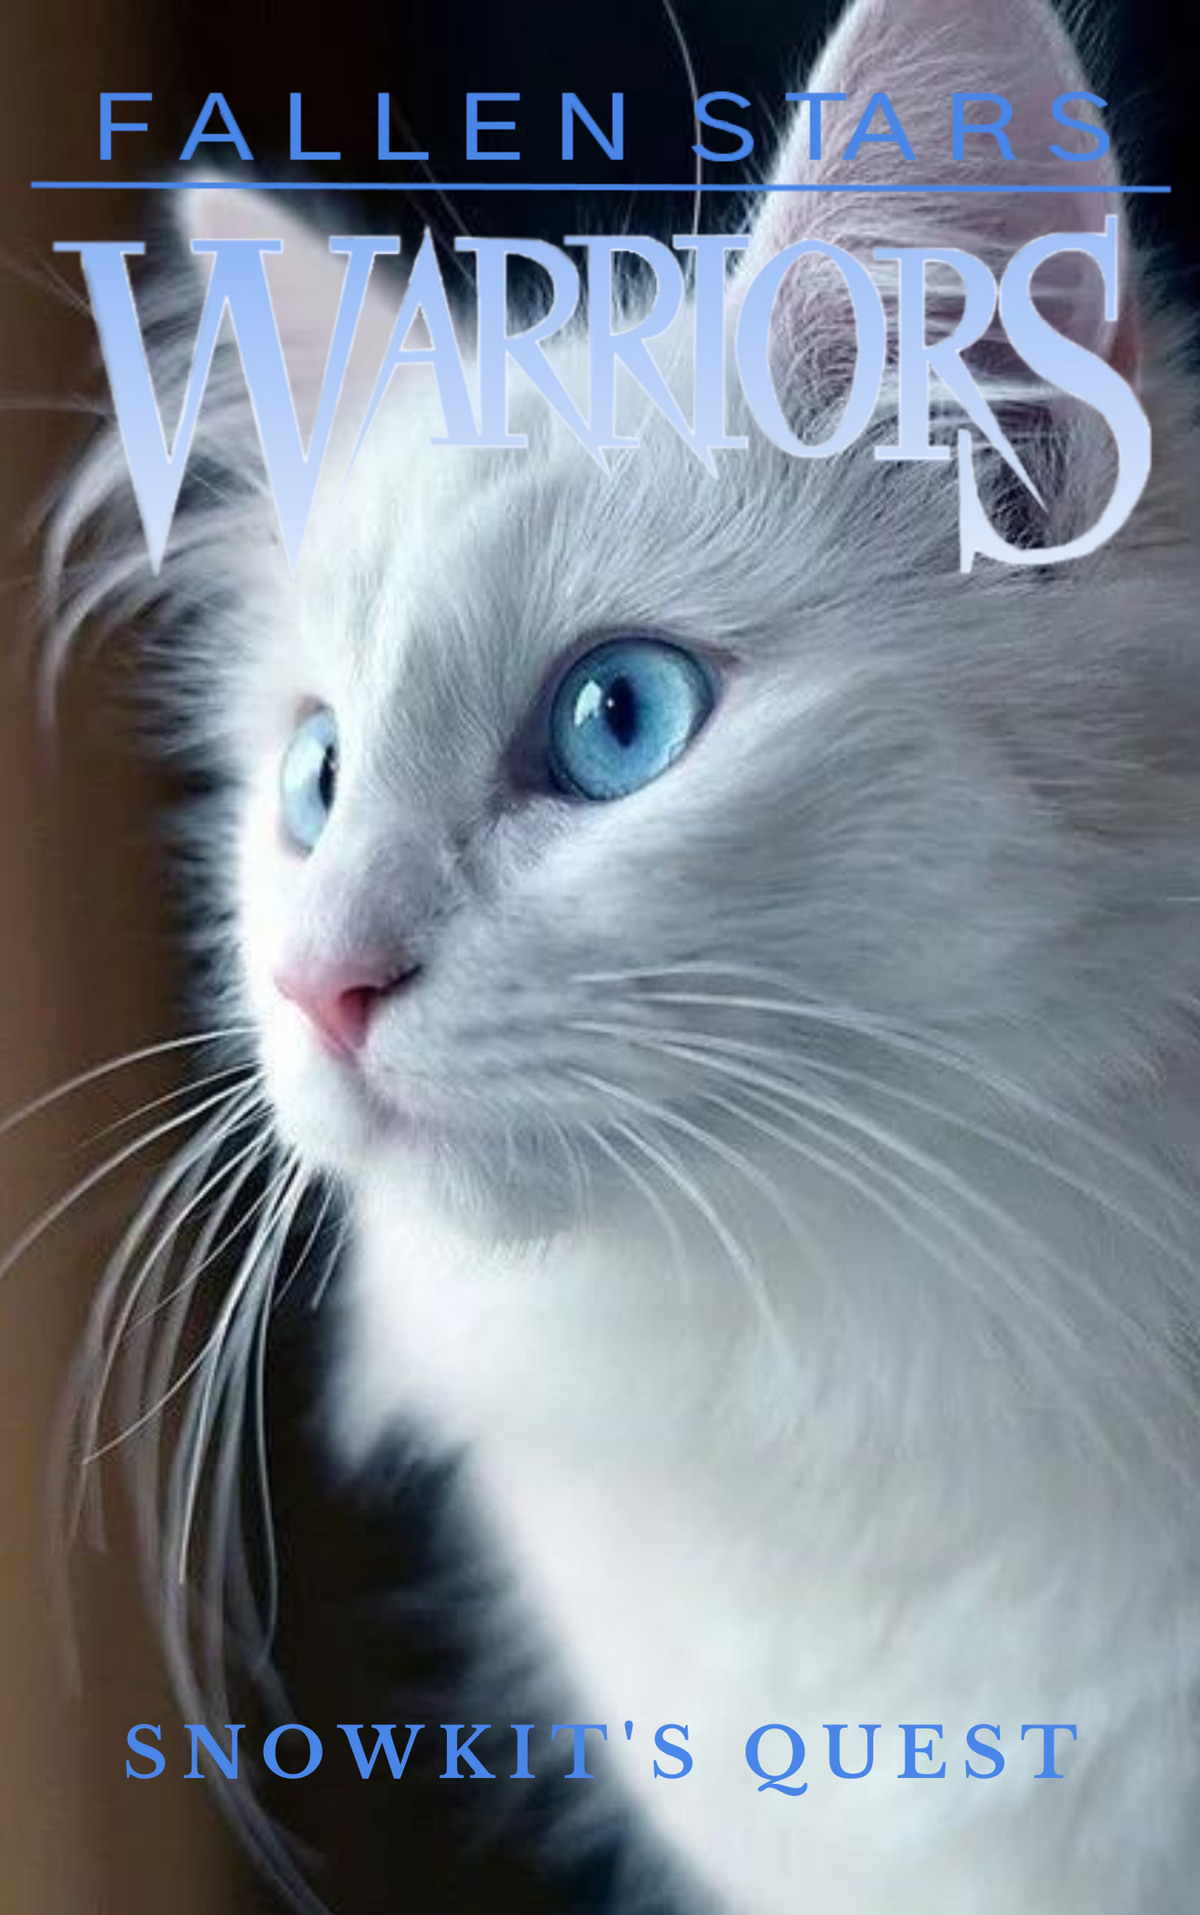 Warrior cats in a nutshell: Snowkit's demise part 2 : r/WarriorCats